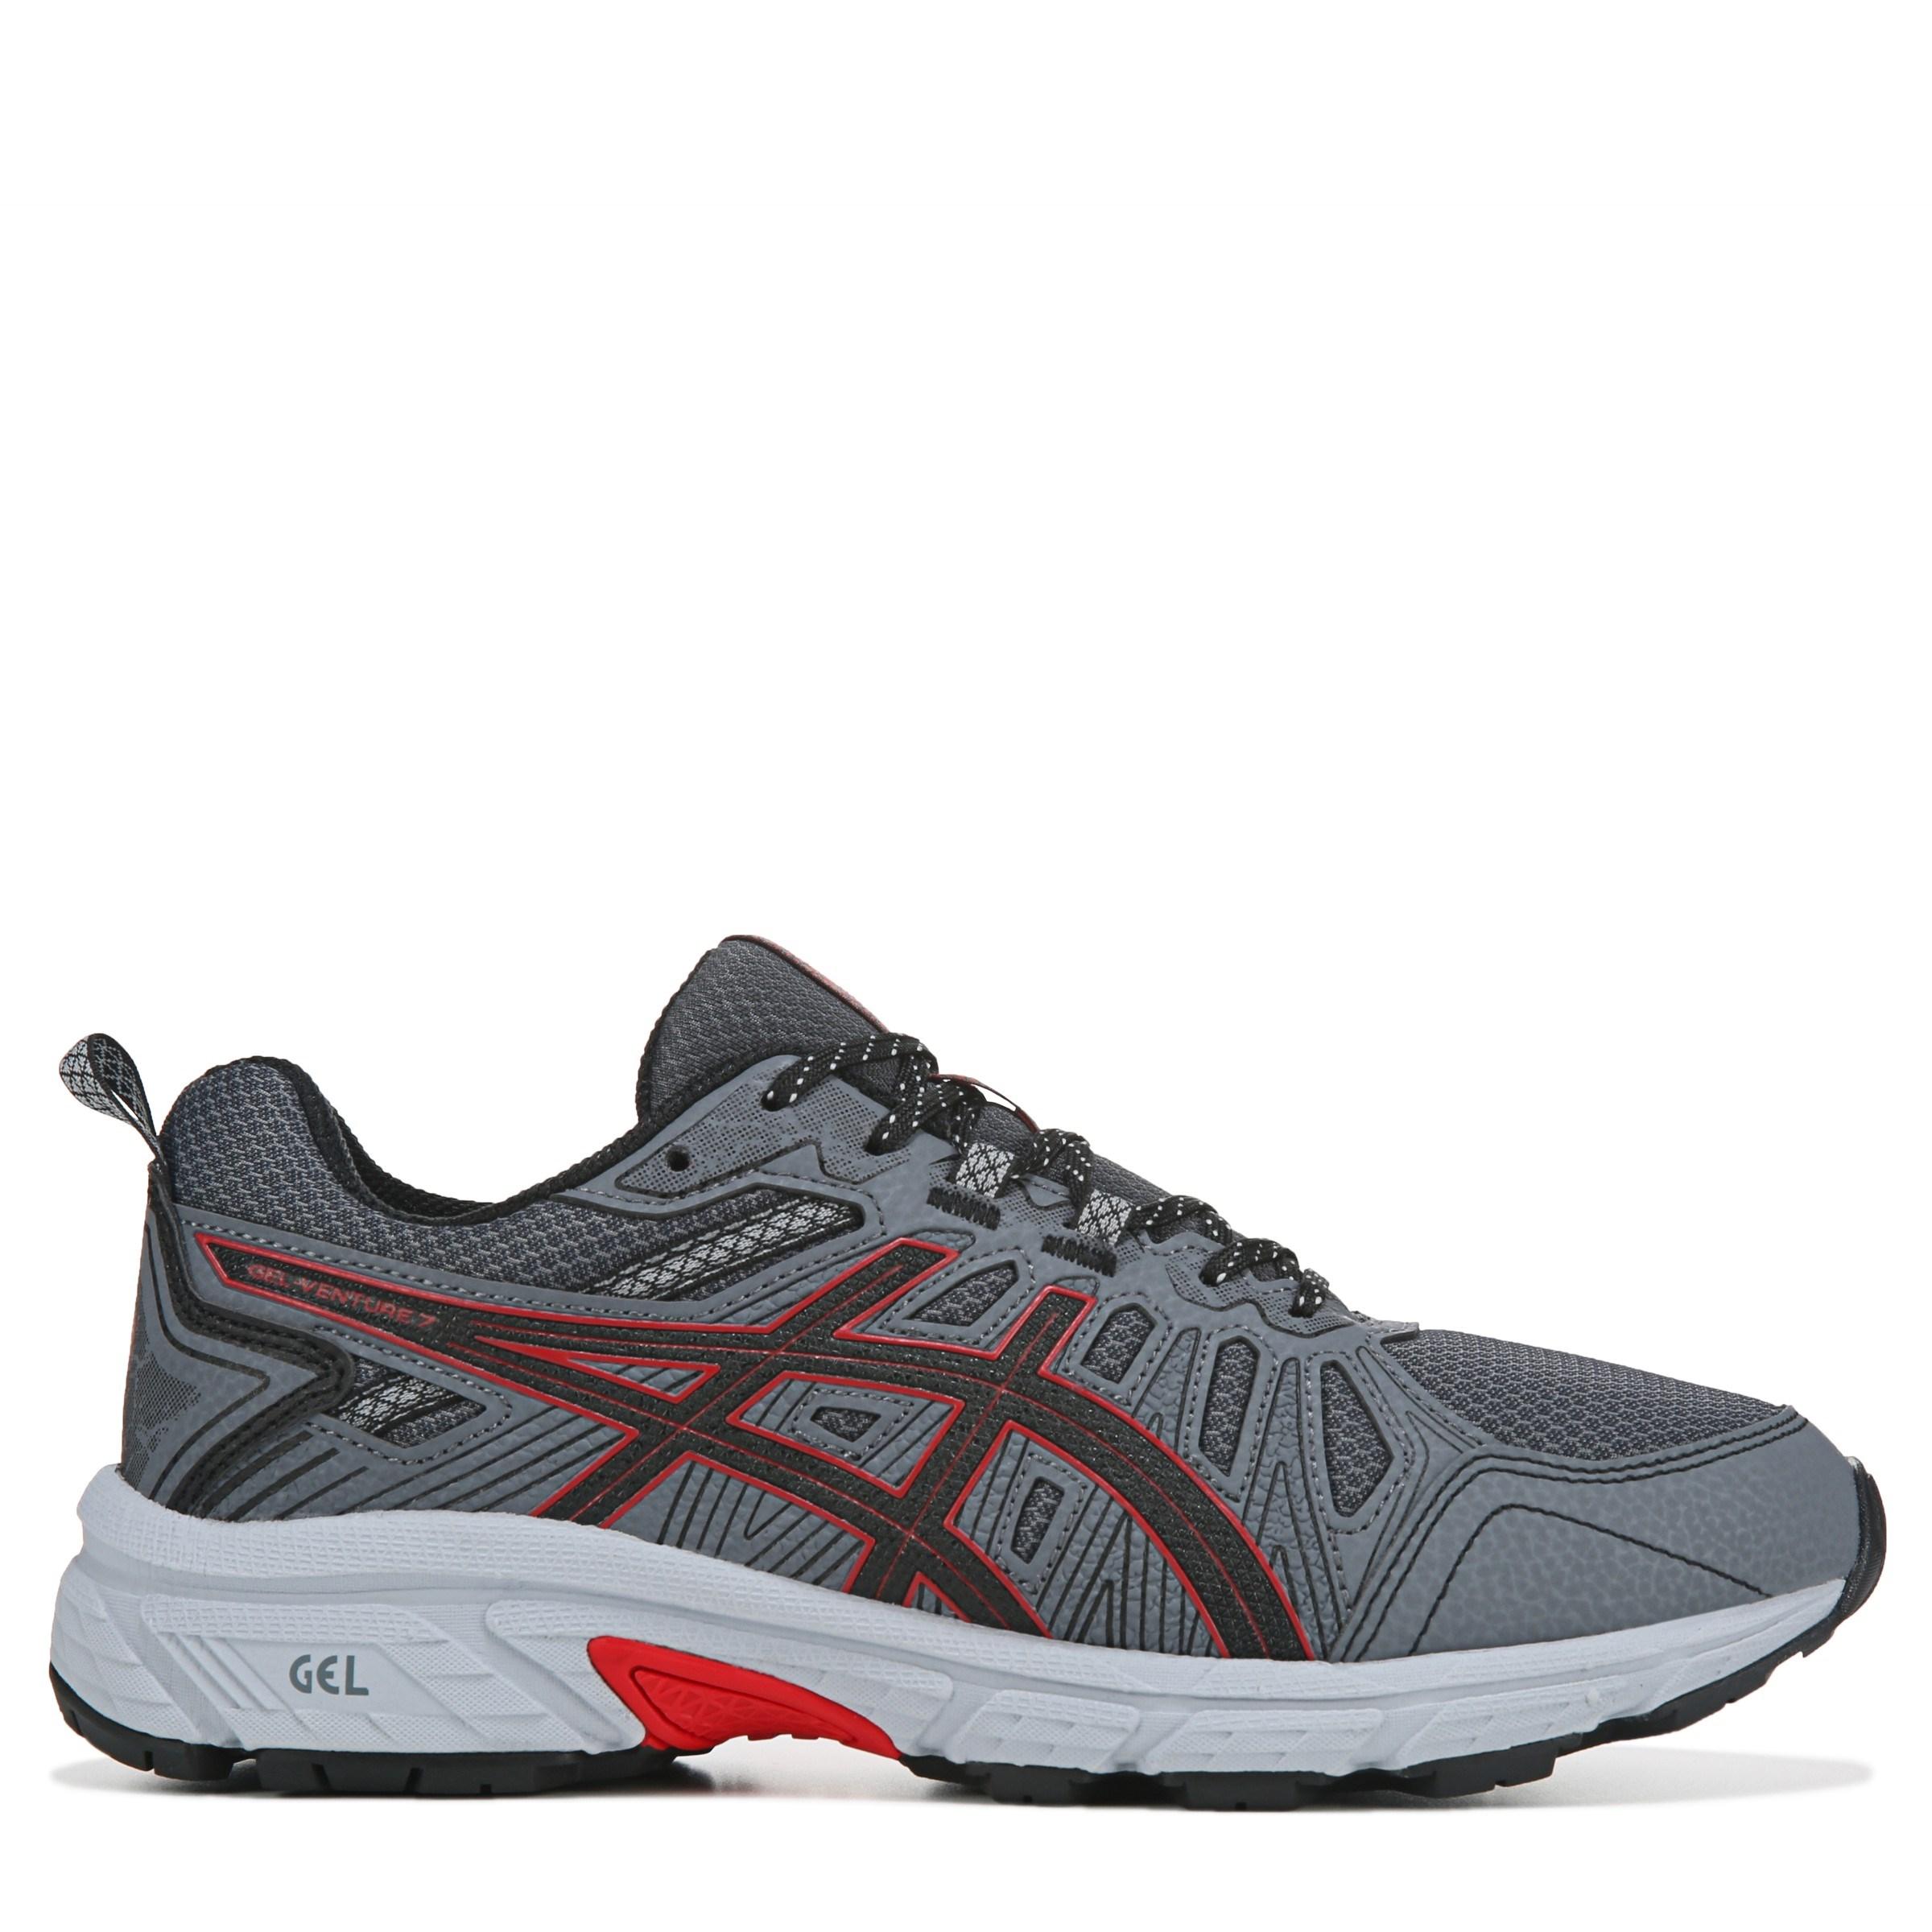 Asics Synthetic Gel-venture 7 4e Trail Running Shoe in Grey/Red (Gray ...